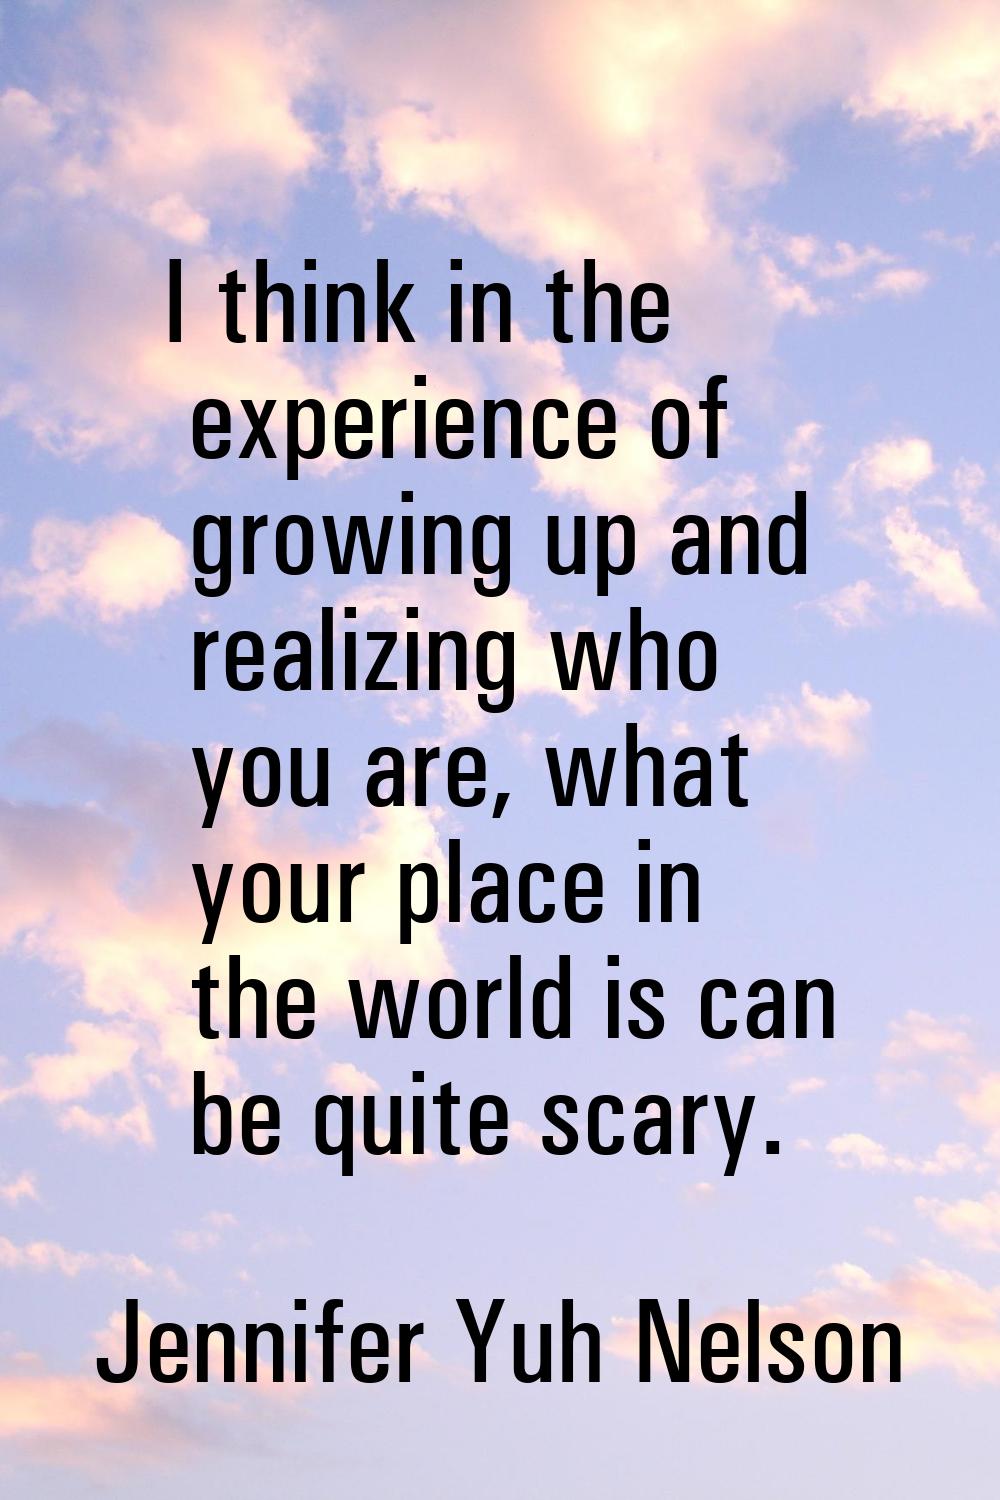 I think in the experience of growing up and realizing who you are, what your place in the world is 